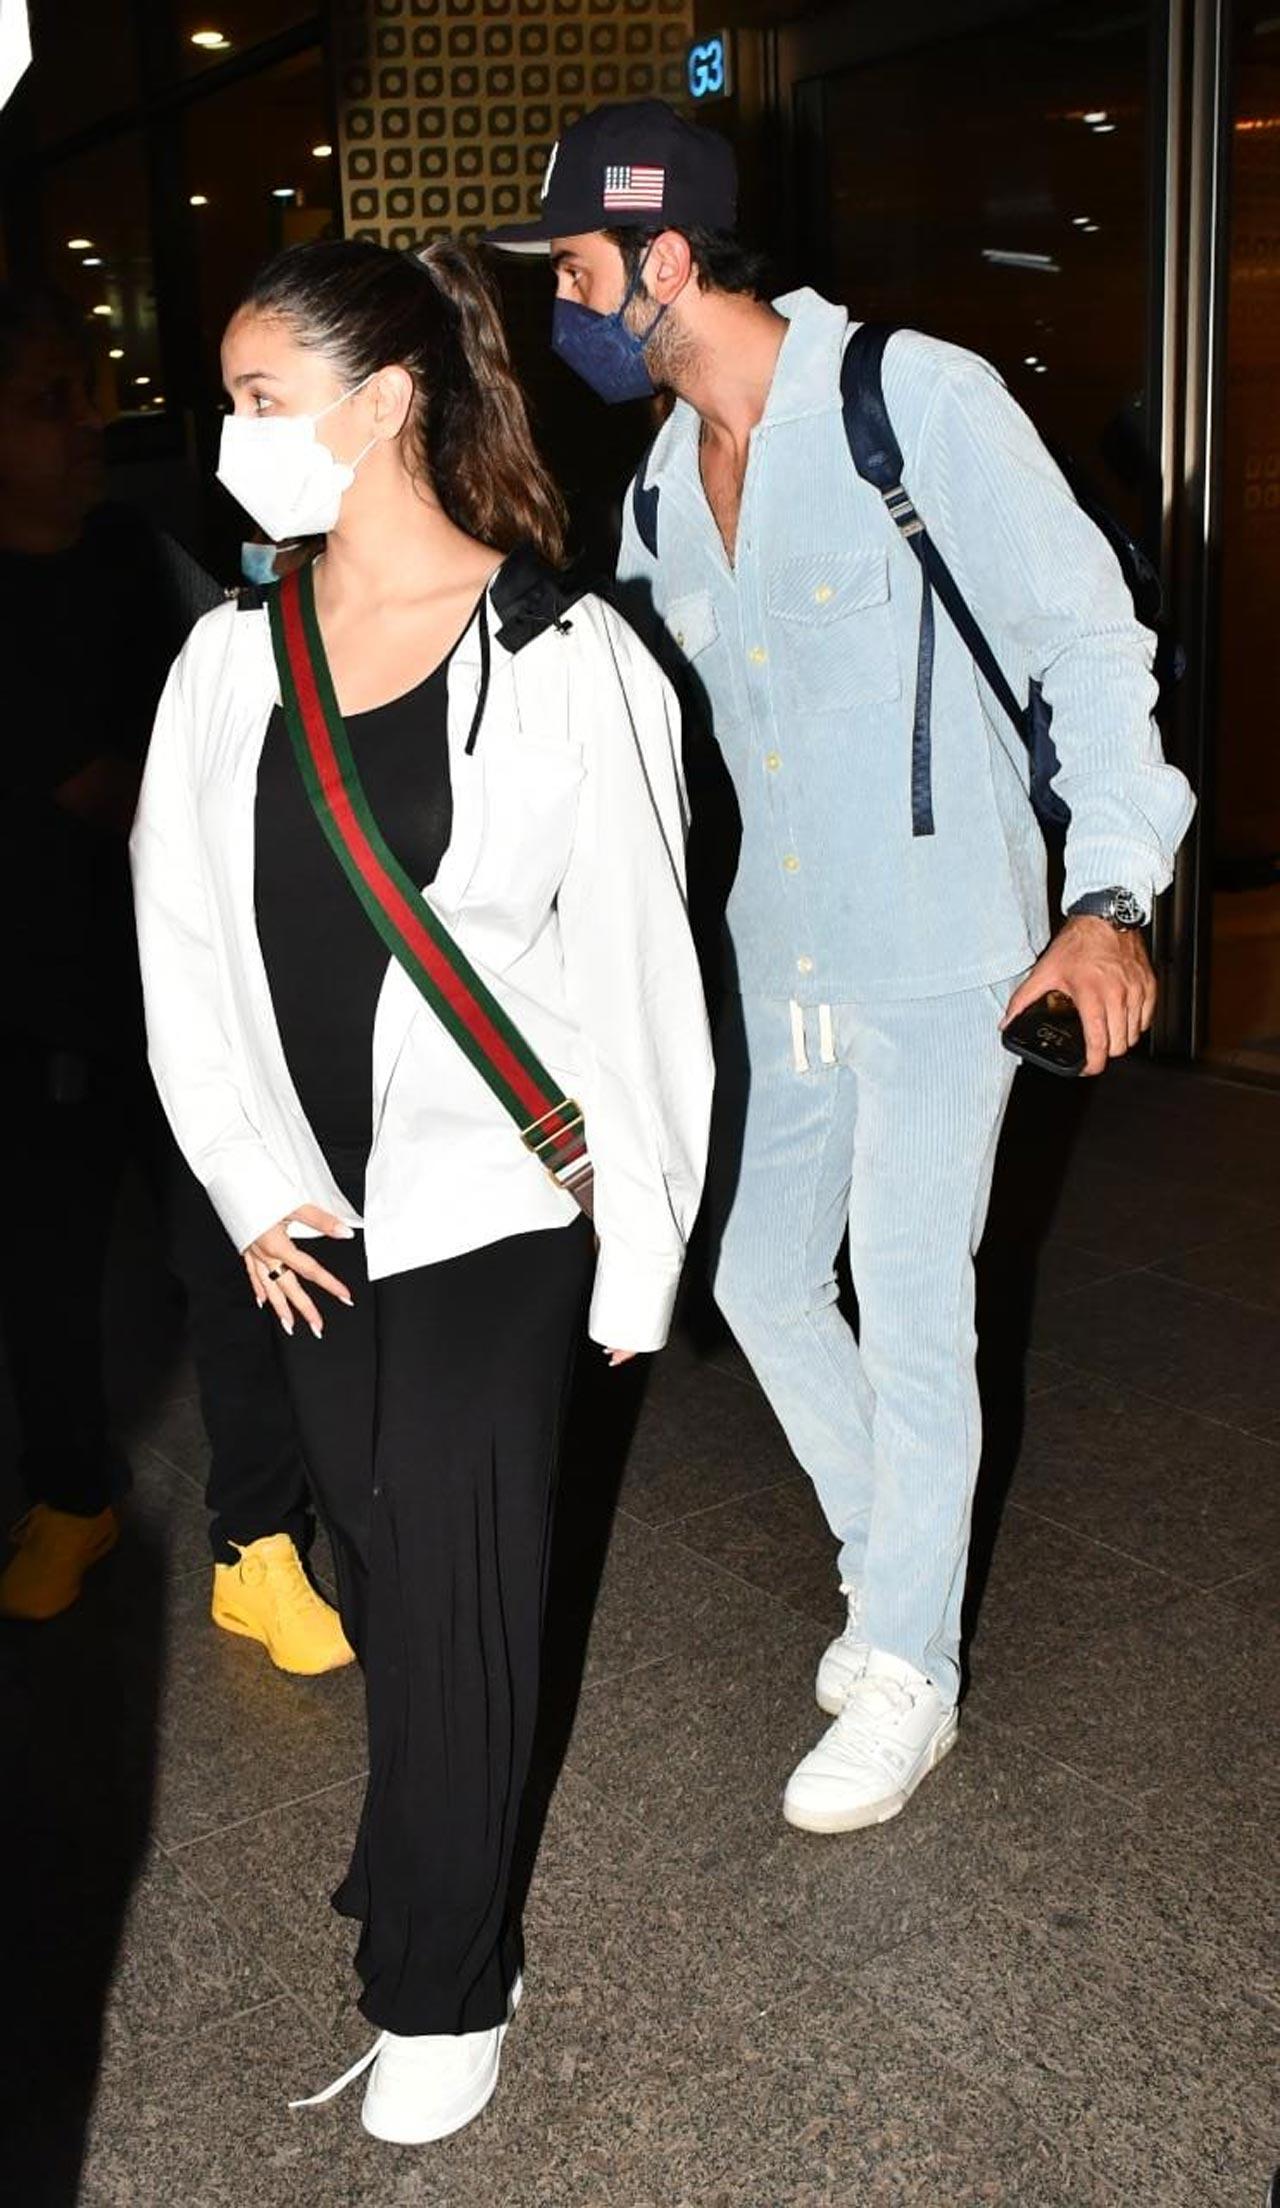 'Brahmastra' is extremely special for Ranbir and Alia as the two fell in love with each other during the shoot of the film